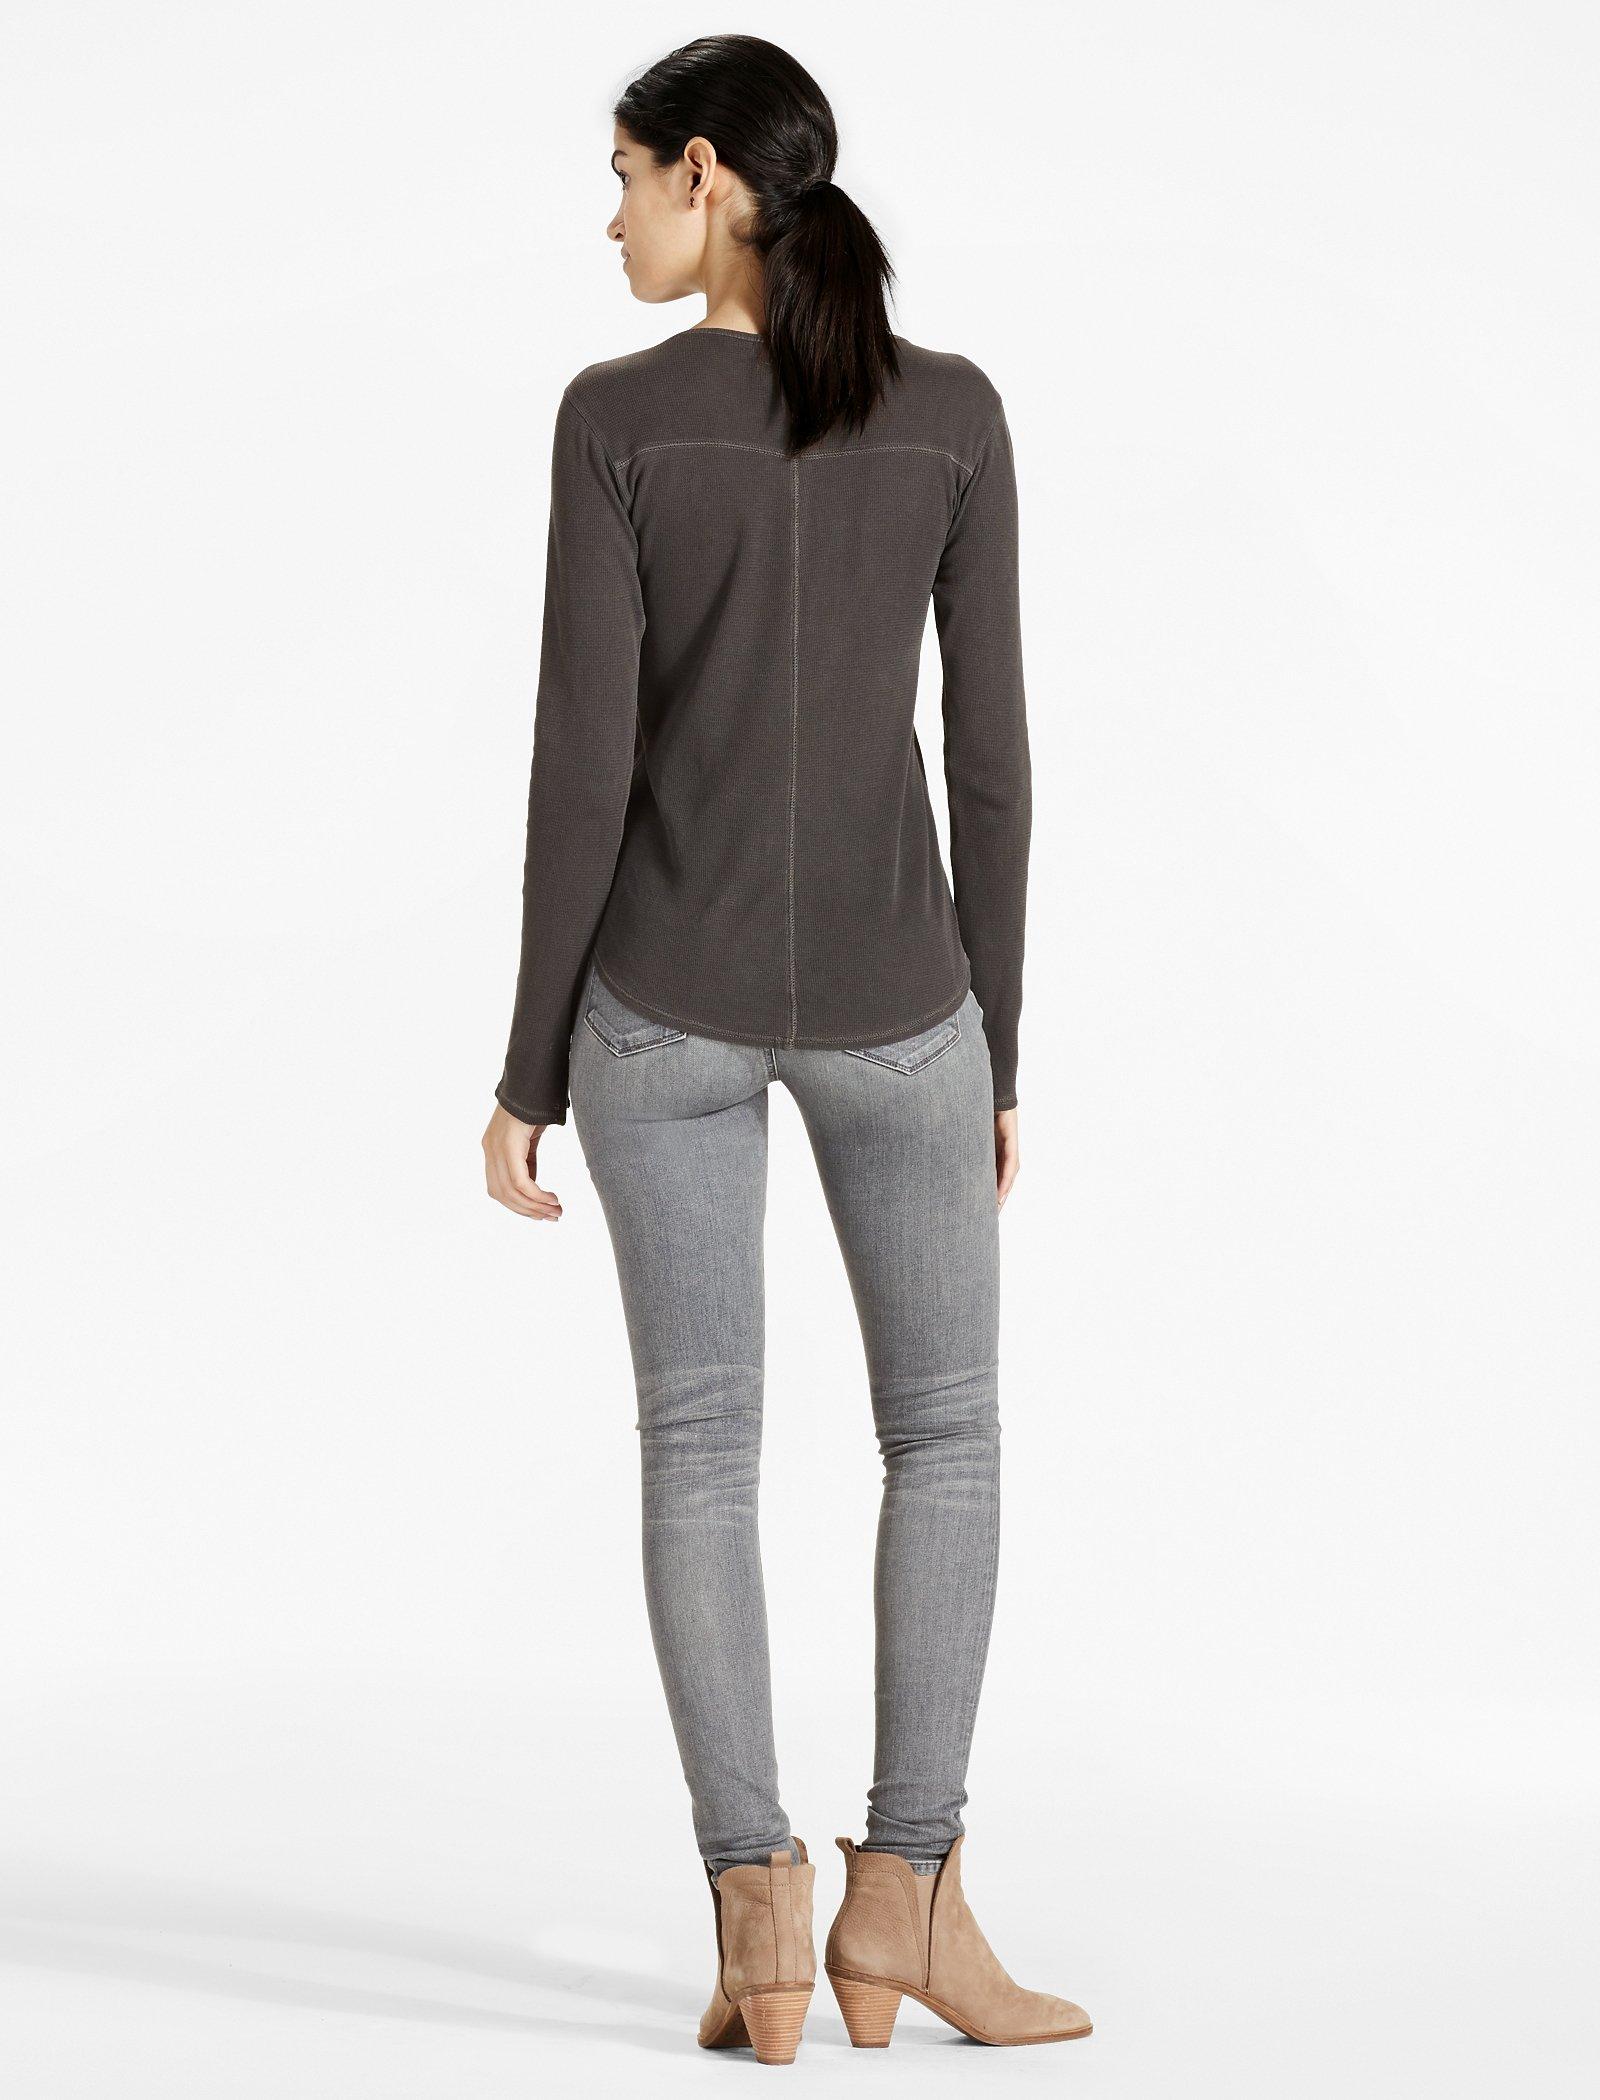 Lucky Brand Lace-Up Bib Thermal Shirt - Long Sleeve (For Women)